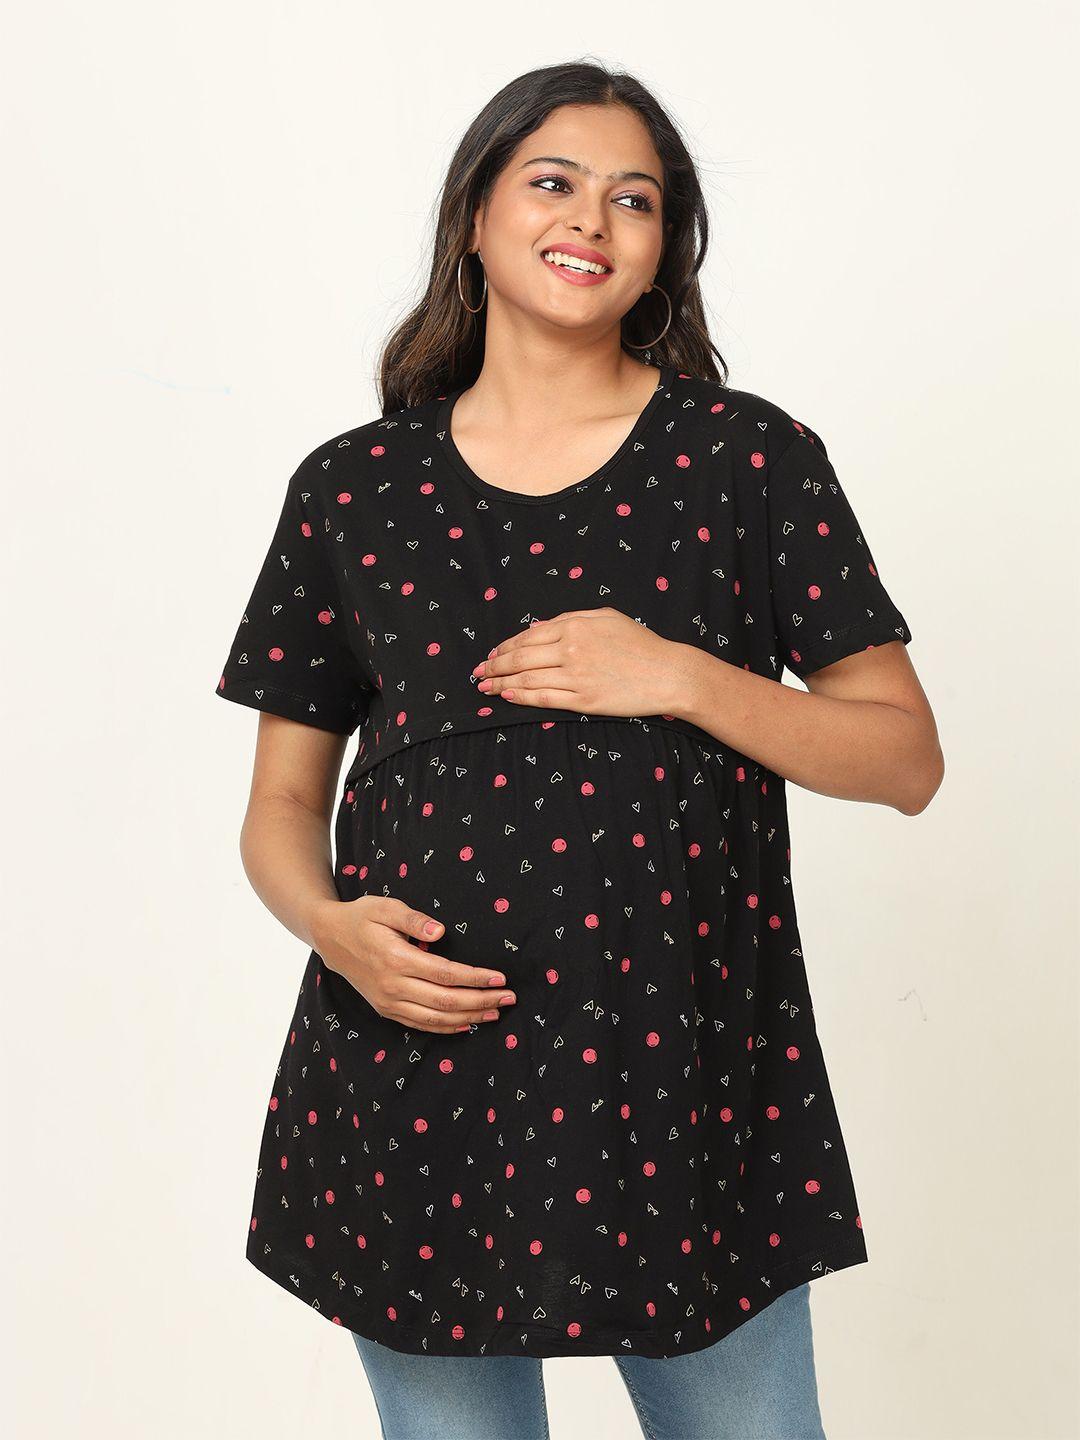 9shines label conversational printed maternity pure cotton longline a-line top